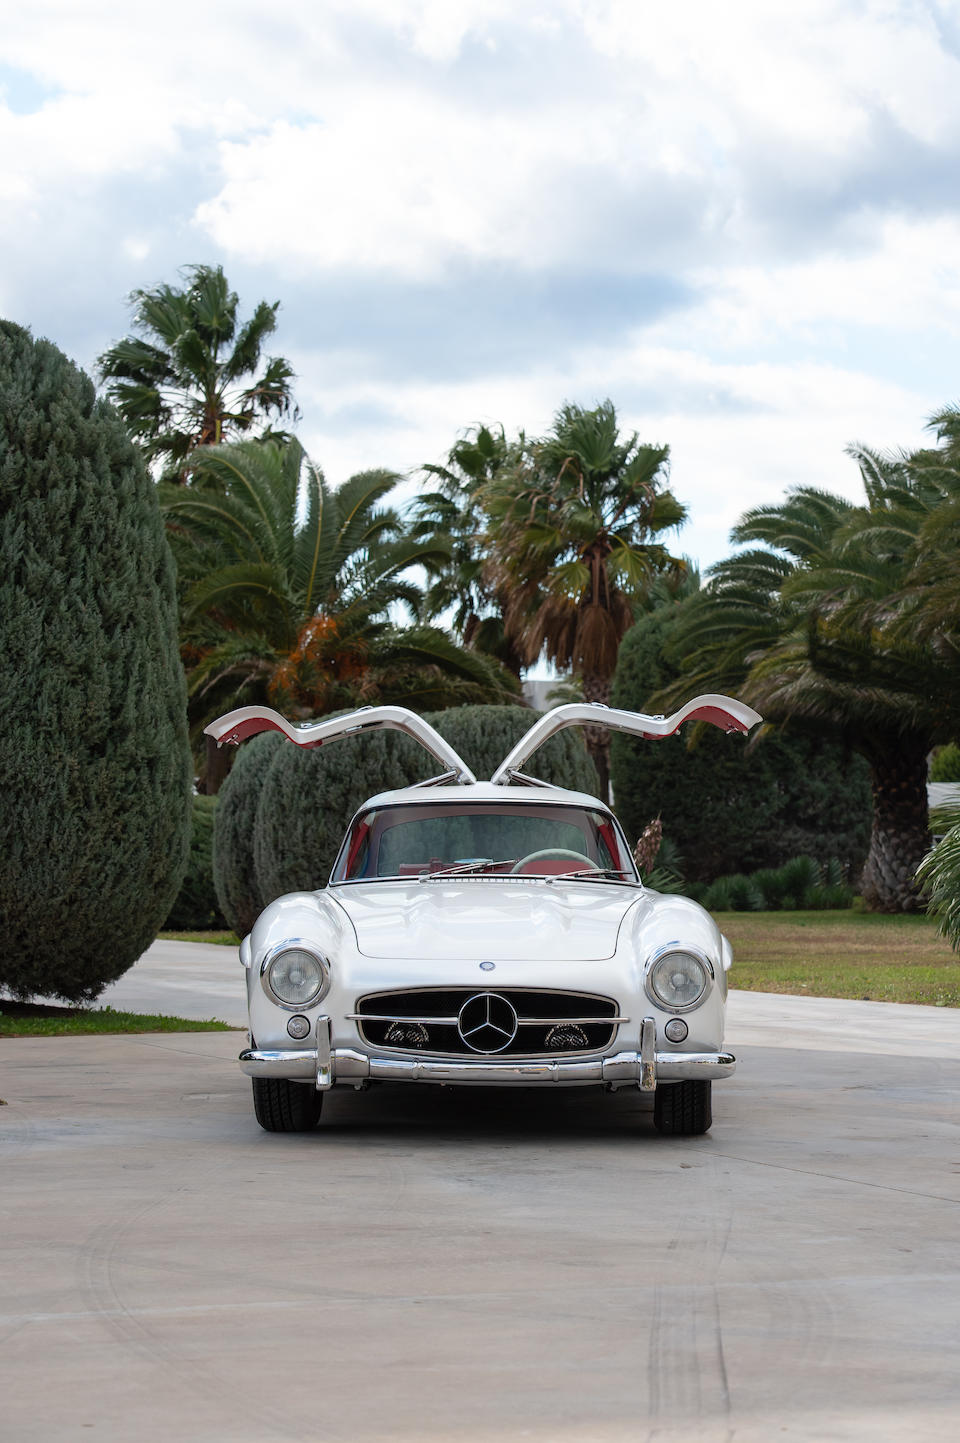 1954 Mercedes-Benz 300 SL 'Gullwing' Coup&#233;  Chassis no. 198.040.4500049